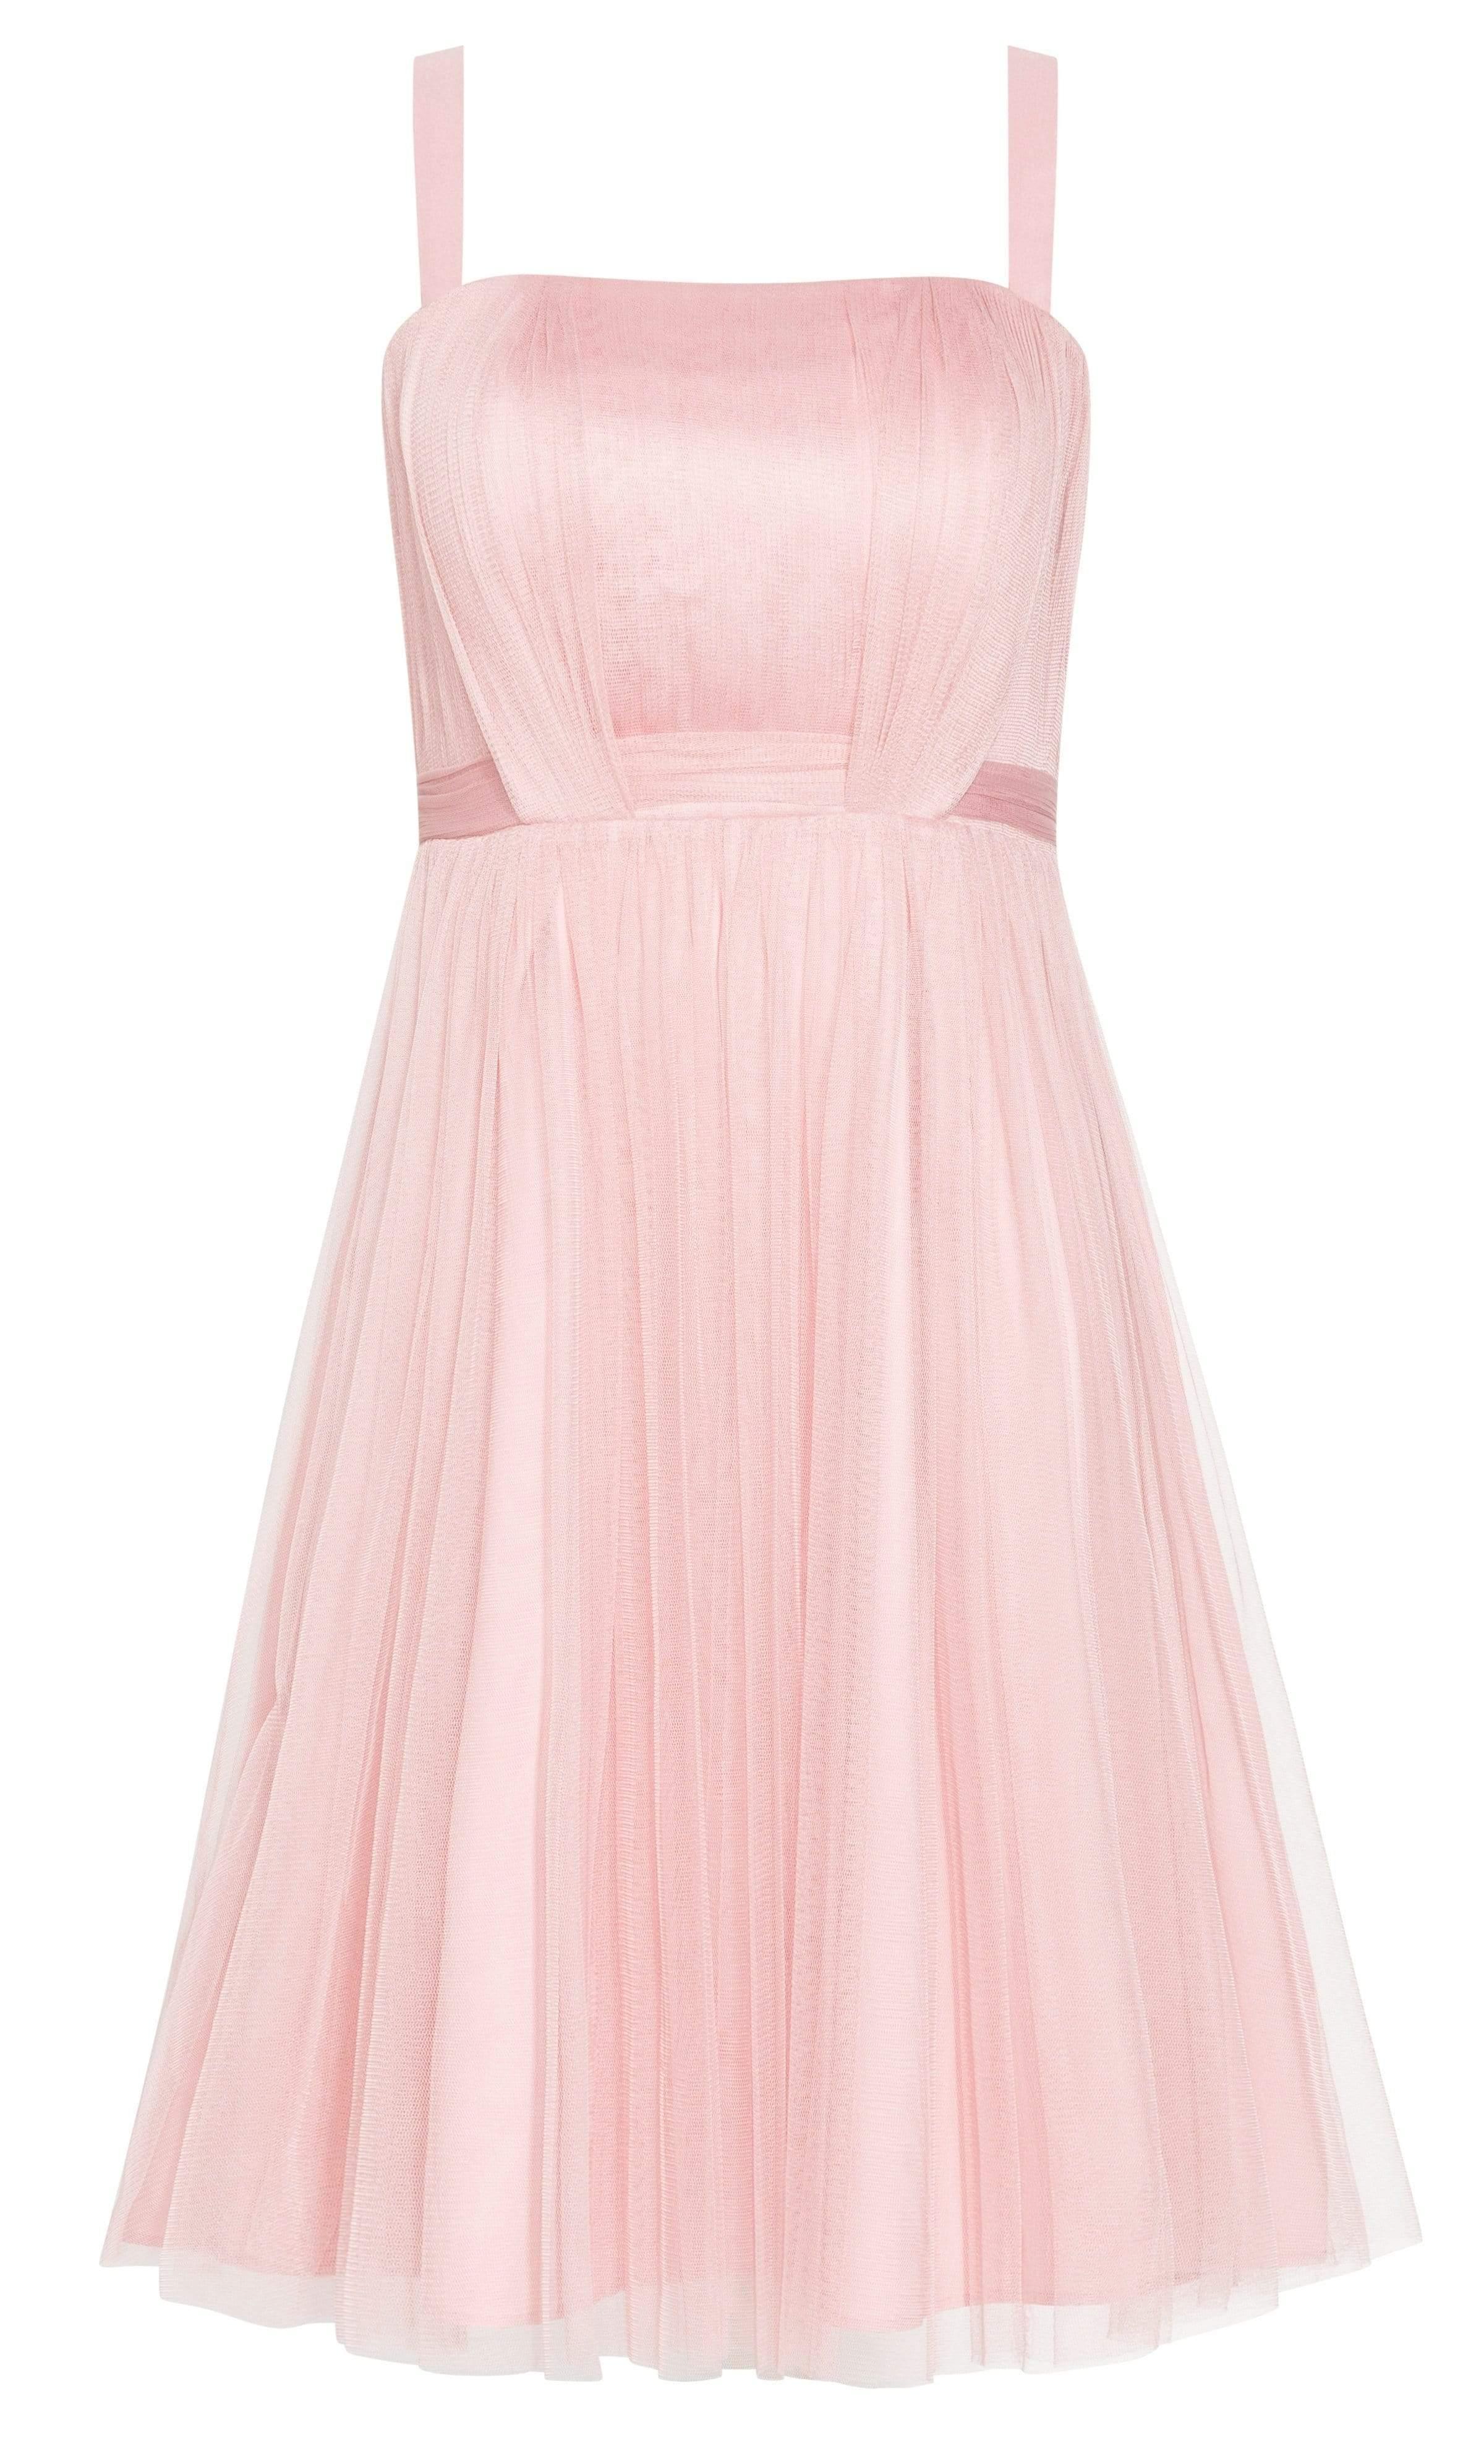 City Chic Midi Tulle Dress in Pink - Save 50% - Lyst